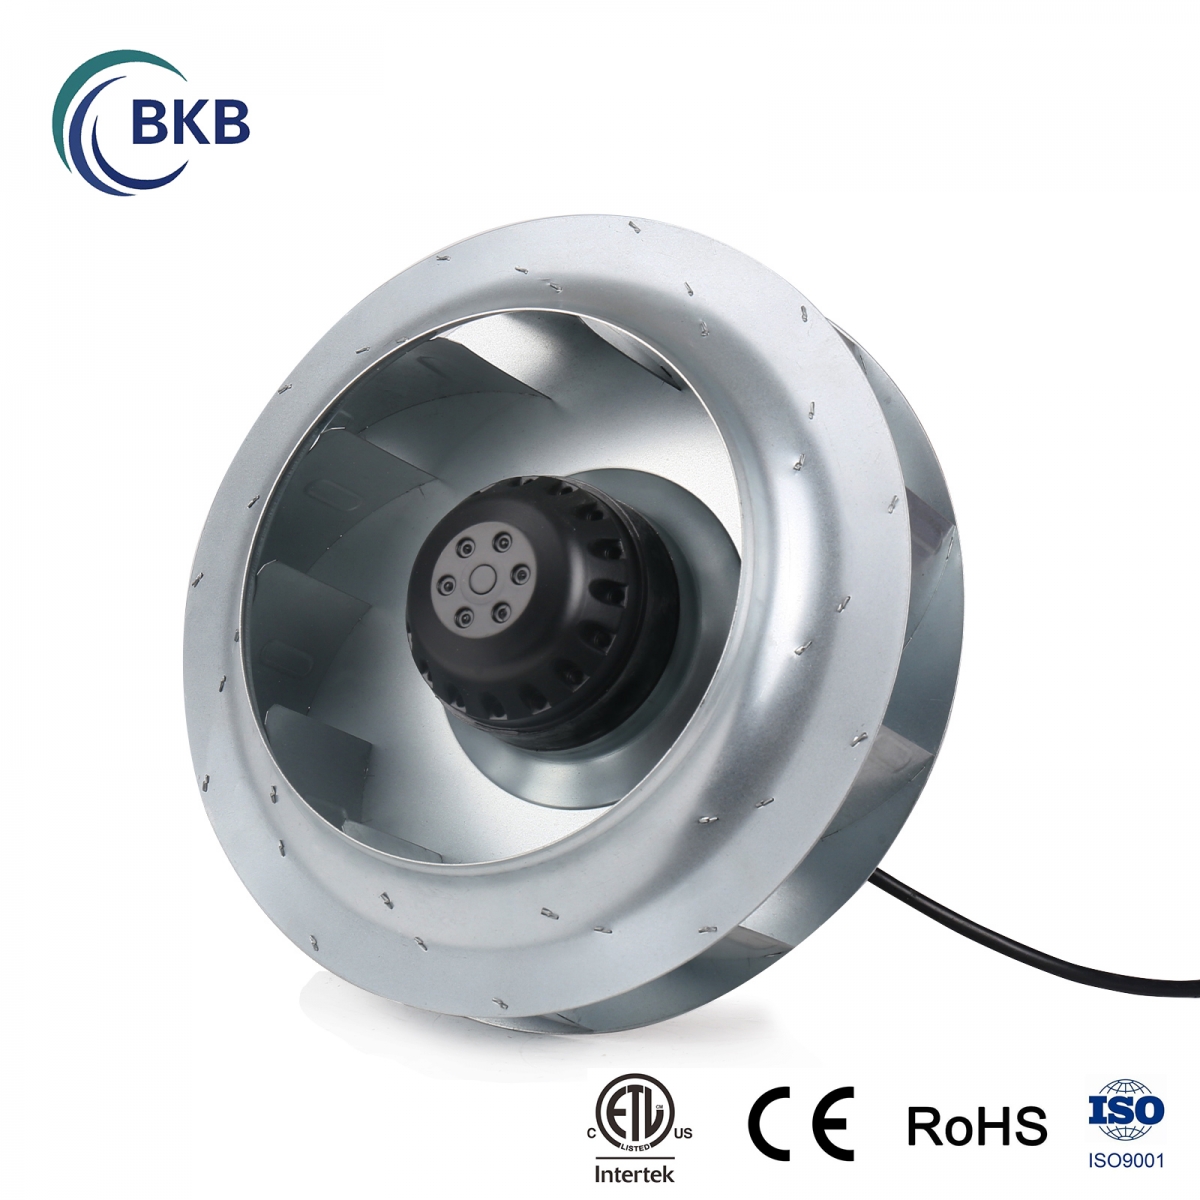 12/30/2021 The shippment of centrifugal fans to Sweden  from manufacturer – SUNLIGHT BLOWER Co., Ltd in Jiangsu ,China .-SUNLIGHT BLOWER,Centrifugal Fans, Inline Fans,Motors,Backward curved centrifugal fans ,Forward curved centrifugal fans ,inlet fans, EC fans